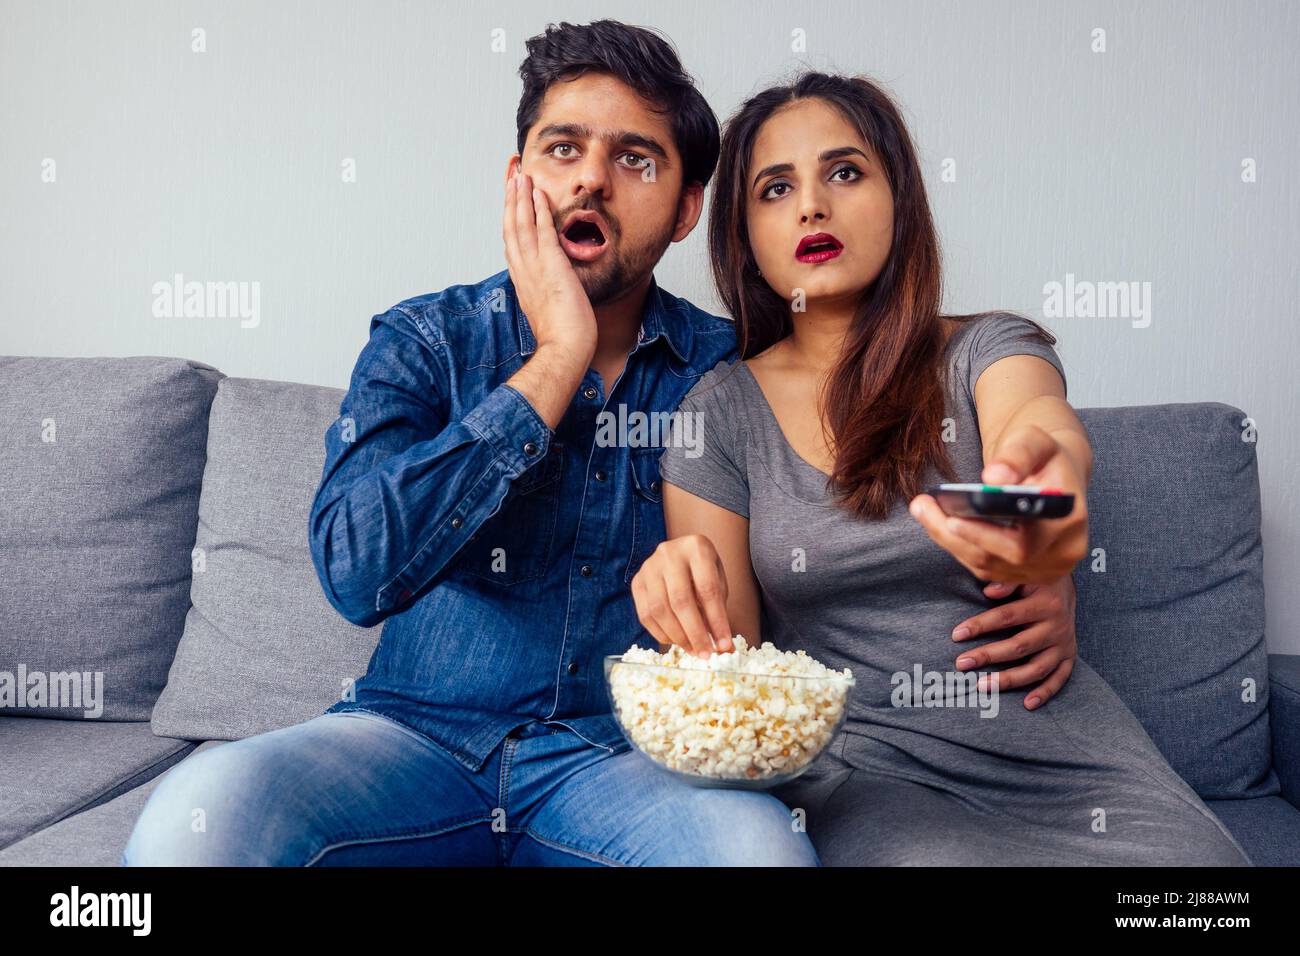 amazed young indian couple watching thriller movie with remote control in hand in living room with popcorn Stock Photo